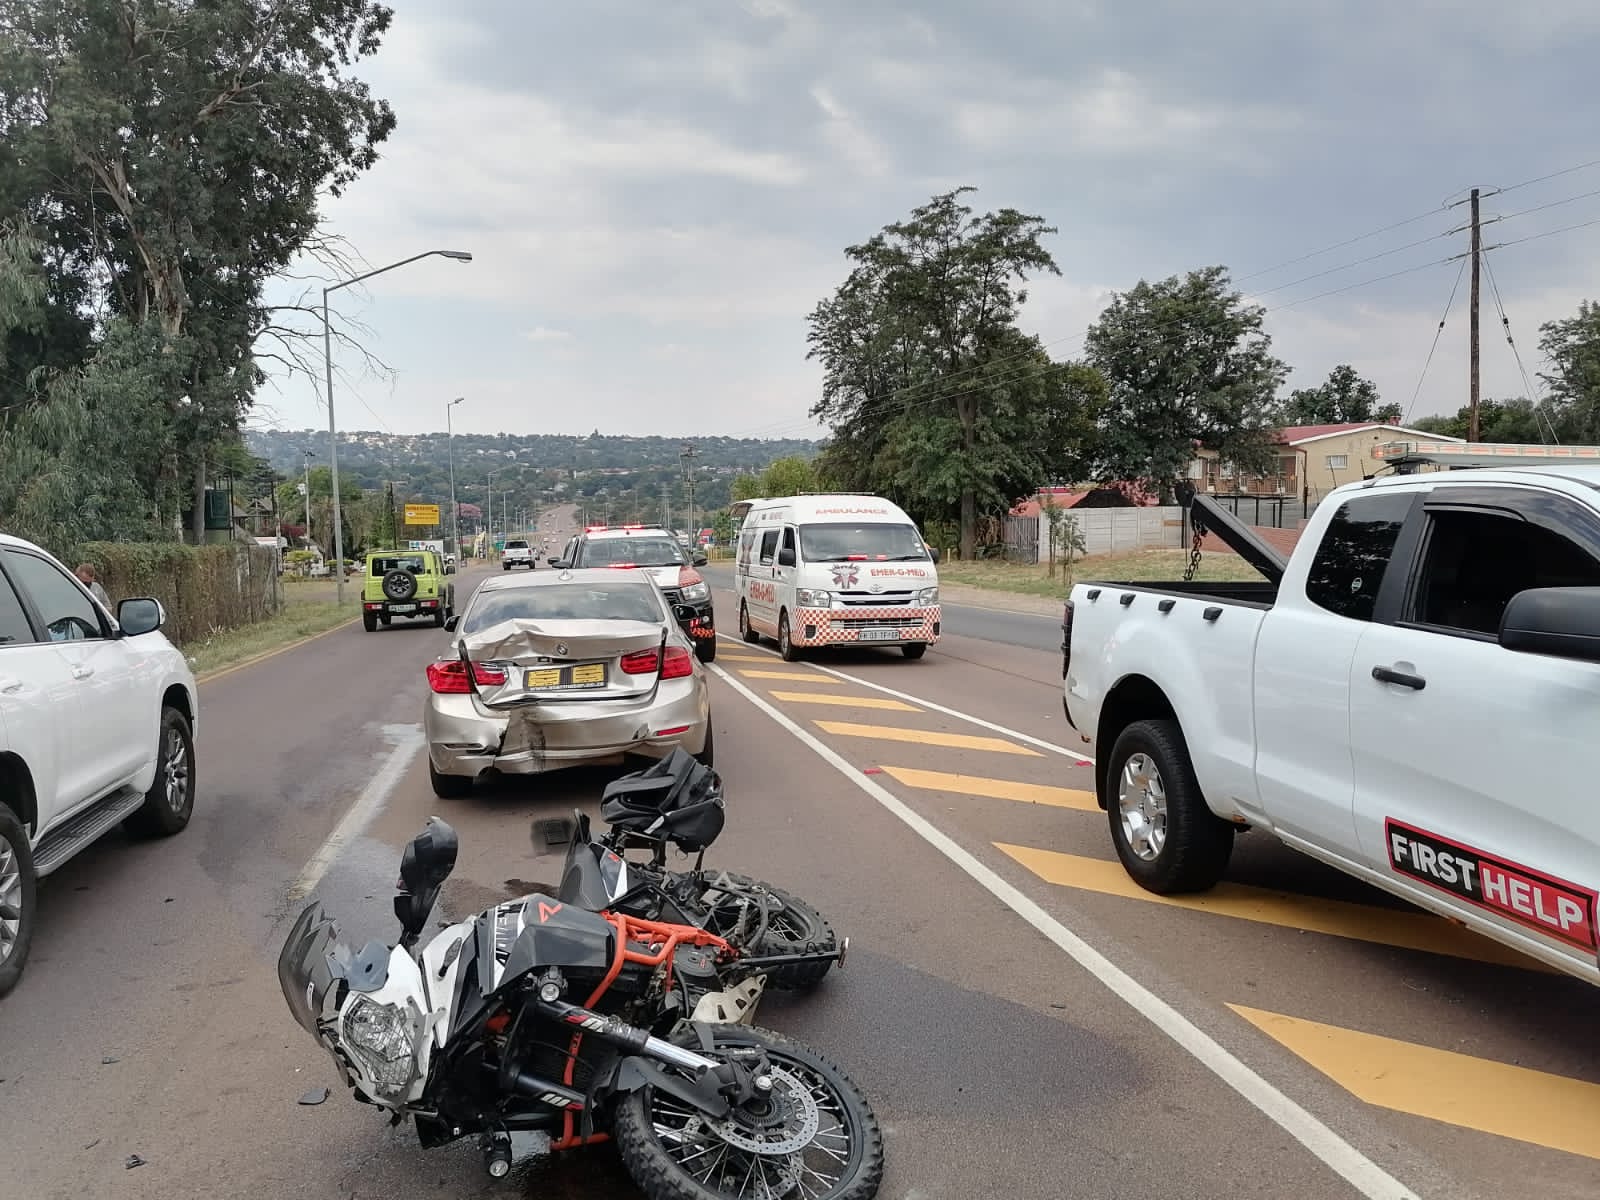 Two injured in a collision between a vehicle and motorcycle in Pretoria